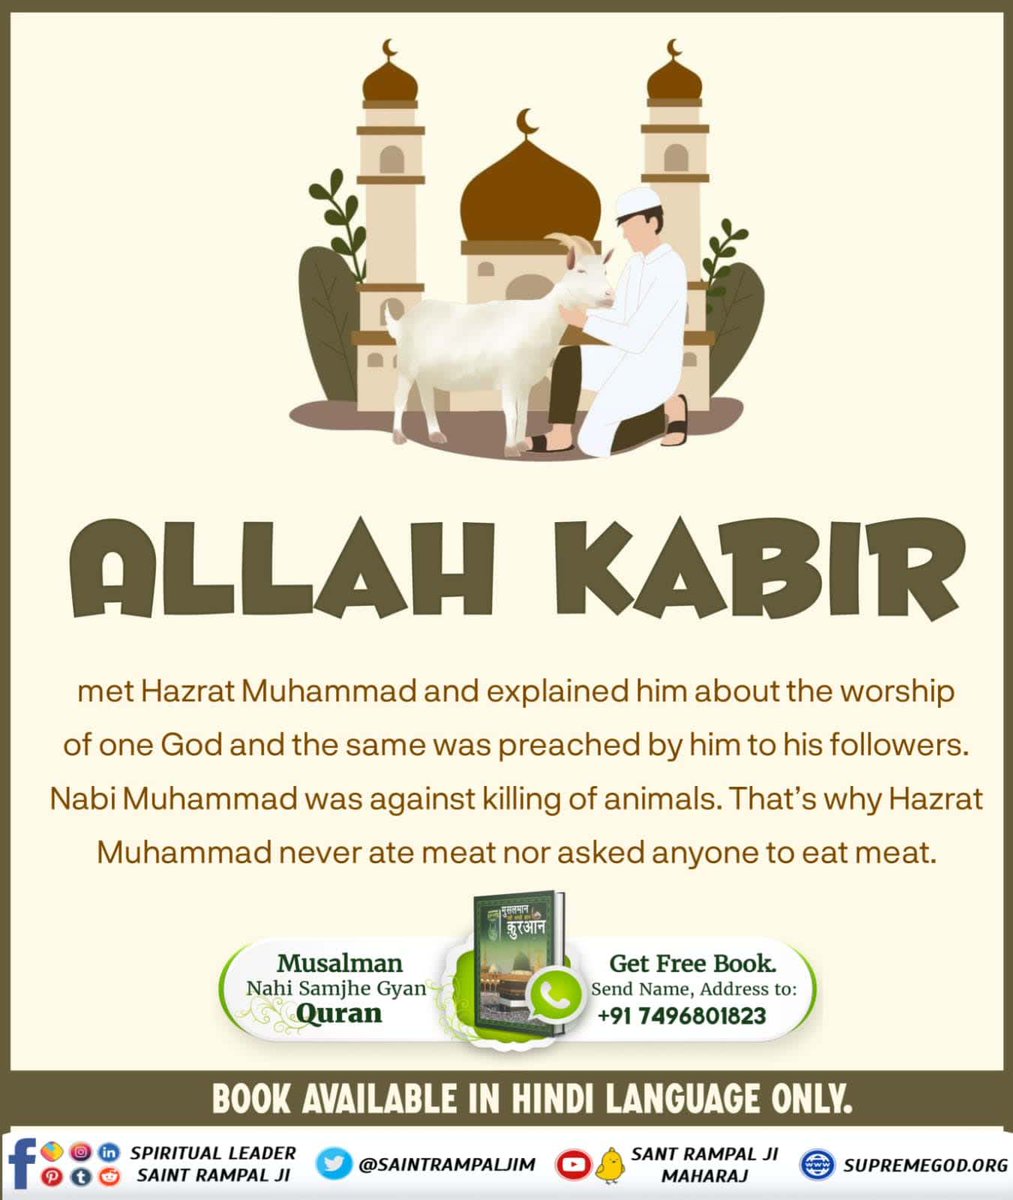 ALLAH KABIR
met Hazrat Muhammad and explained him about the worship of one God and the same was preached by him to his followers. Nabi Muhammad was against killing of animals. That's why Hazrat Muhammad never ate meat nor asked anyone to eat meat.
#रहम_करो_मूक_जीवों_पर